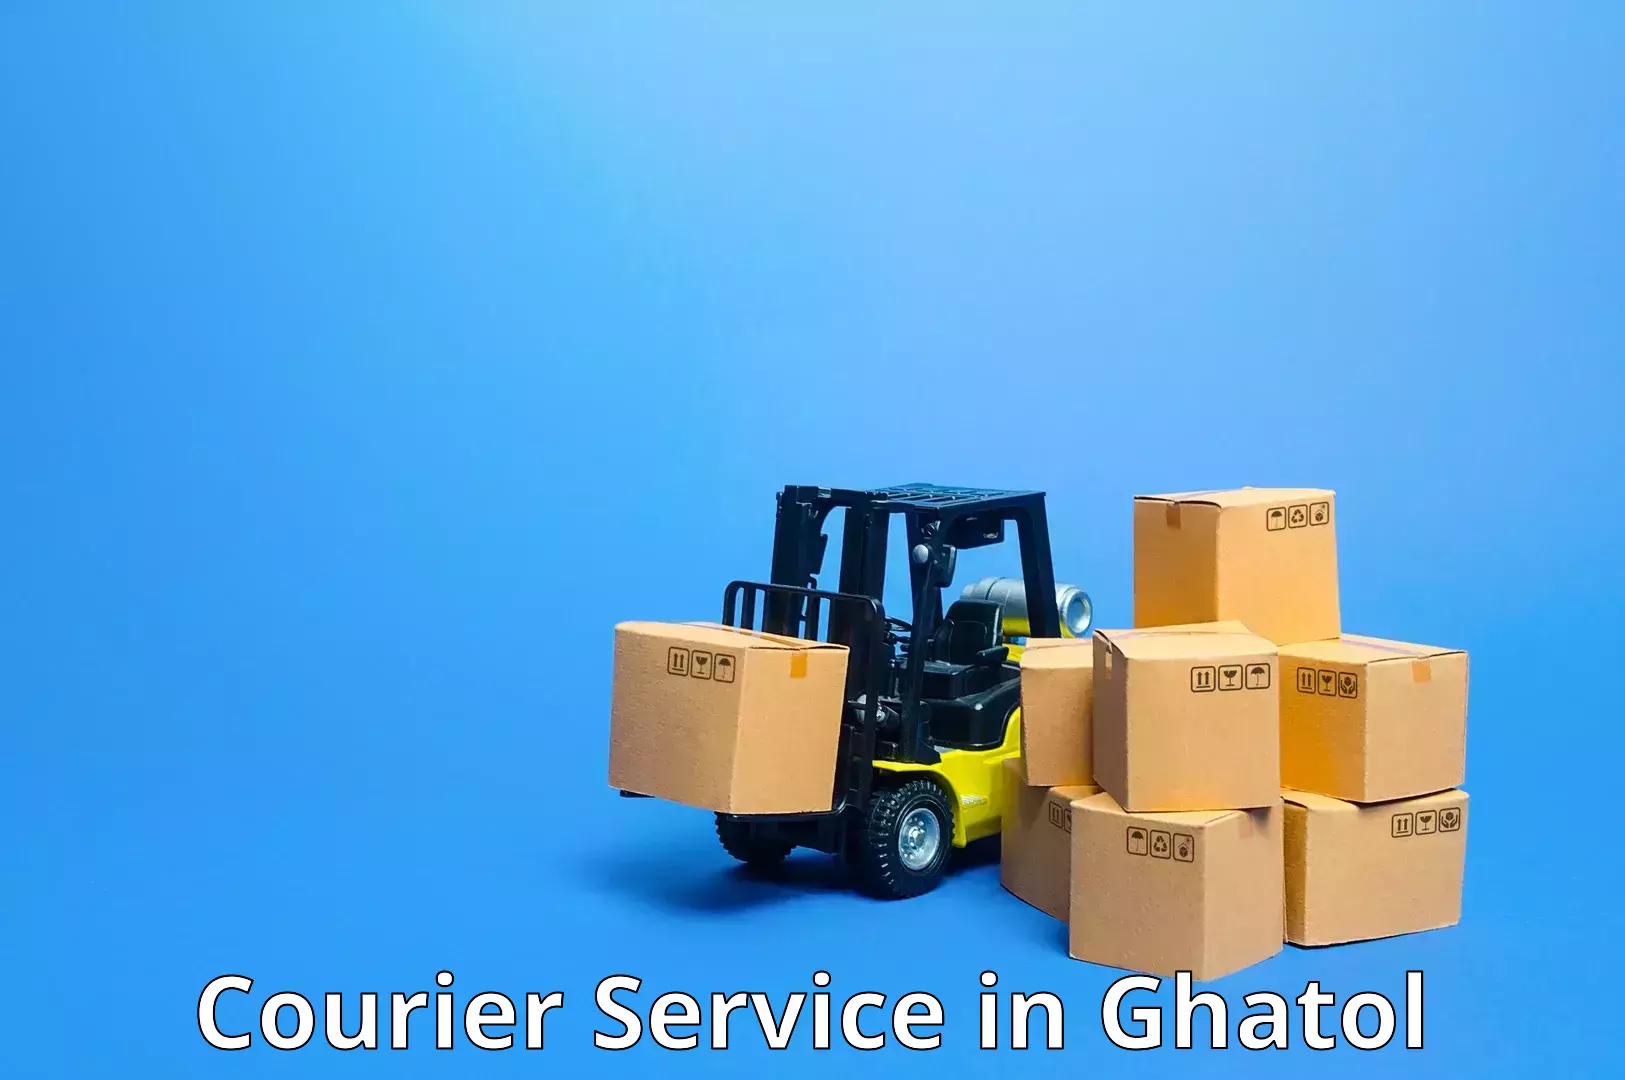 Postal and courier services in Ghatol